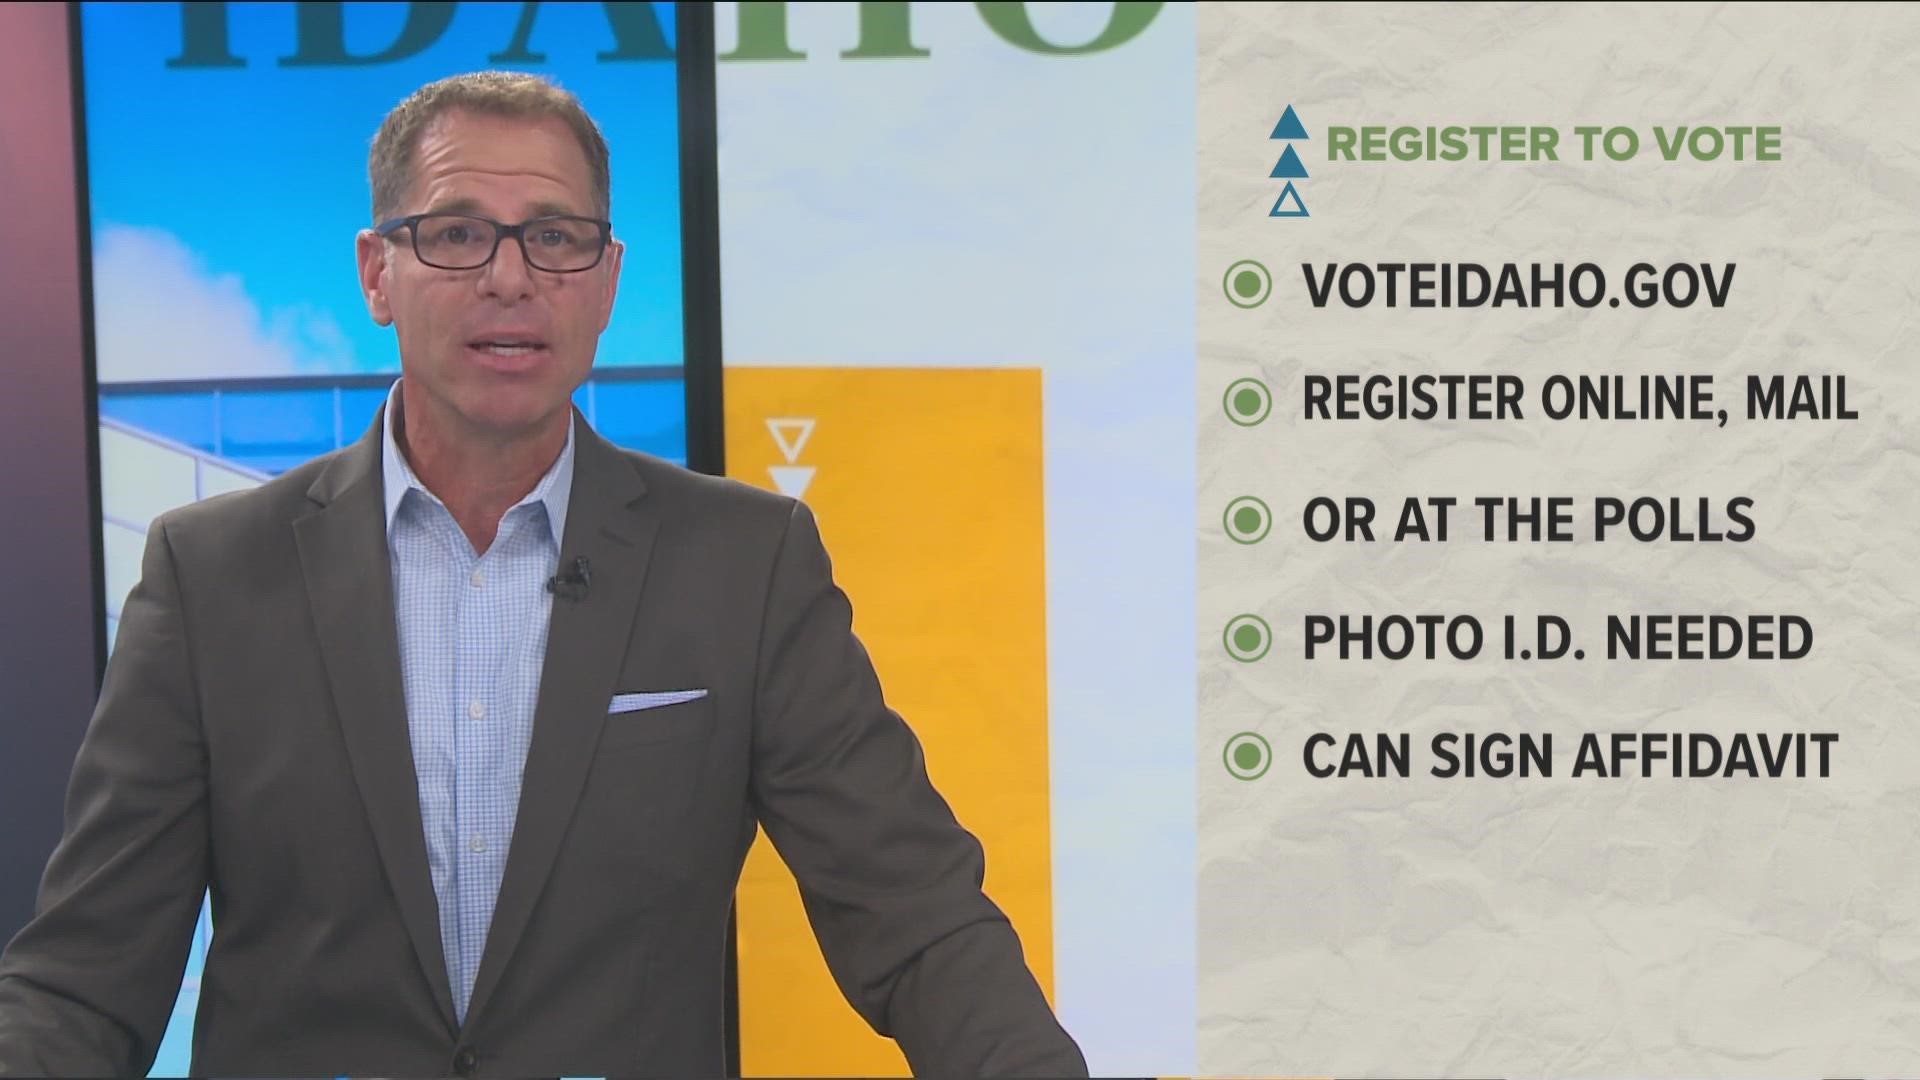 Tuesday marks National Voter Registration Day. In Idaho, you can register to vote online immediately for the general election at voteidaho.gov.